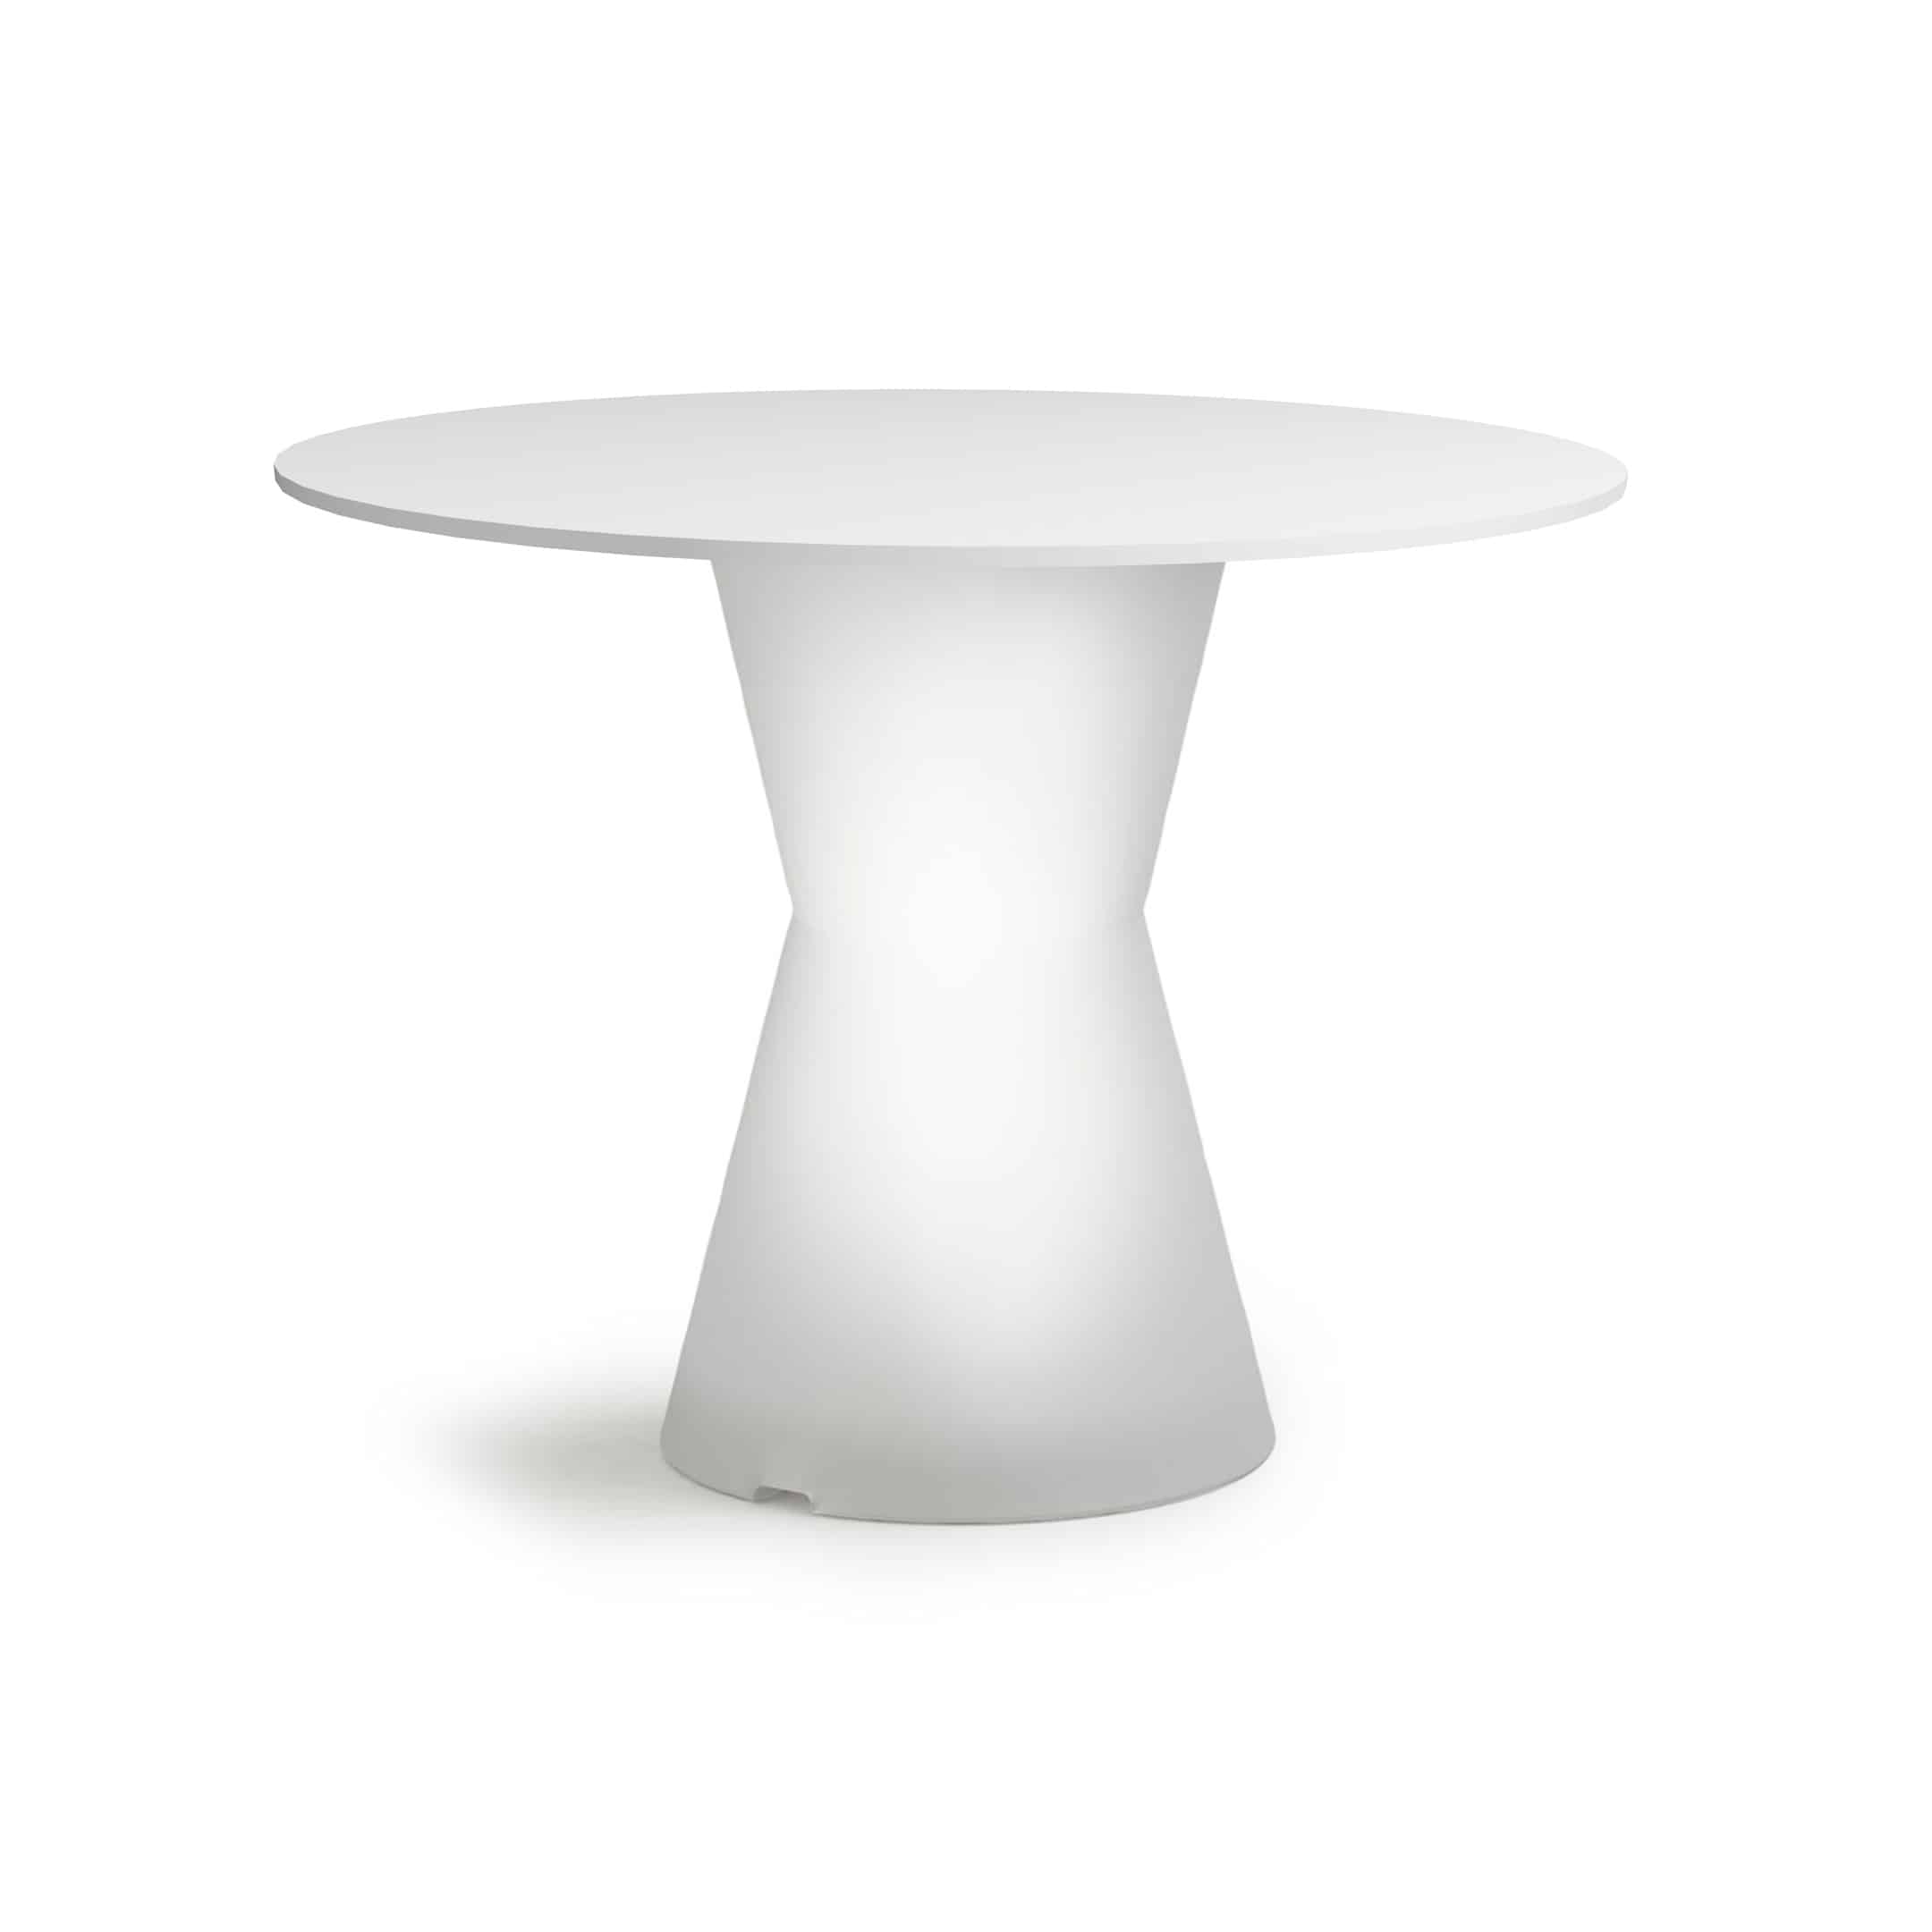 Table Dot lumineuse blanche plateau circulaire blanc